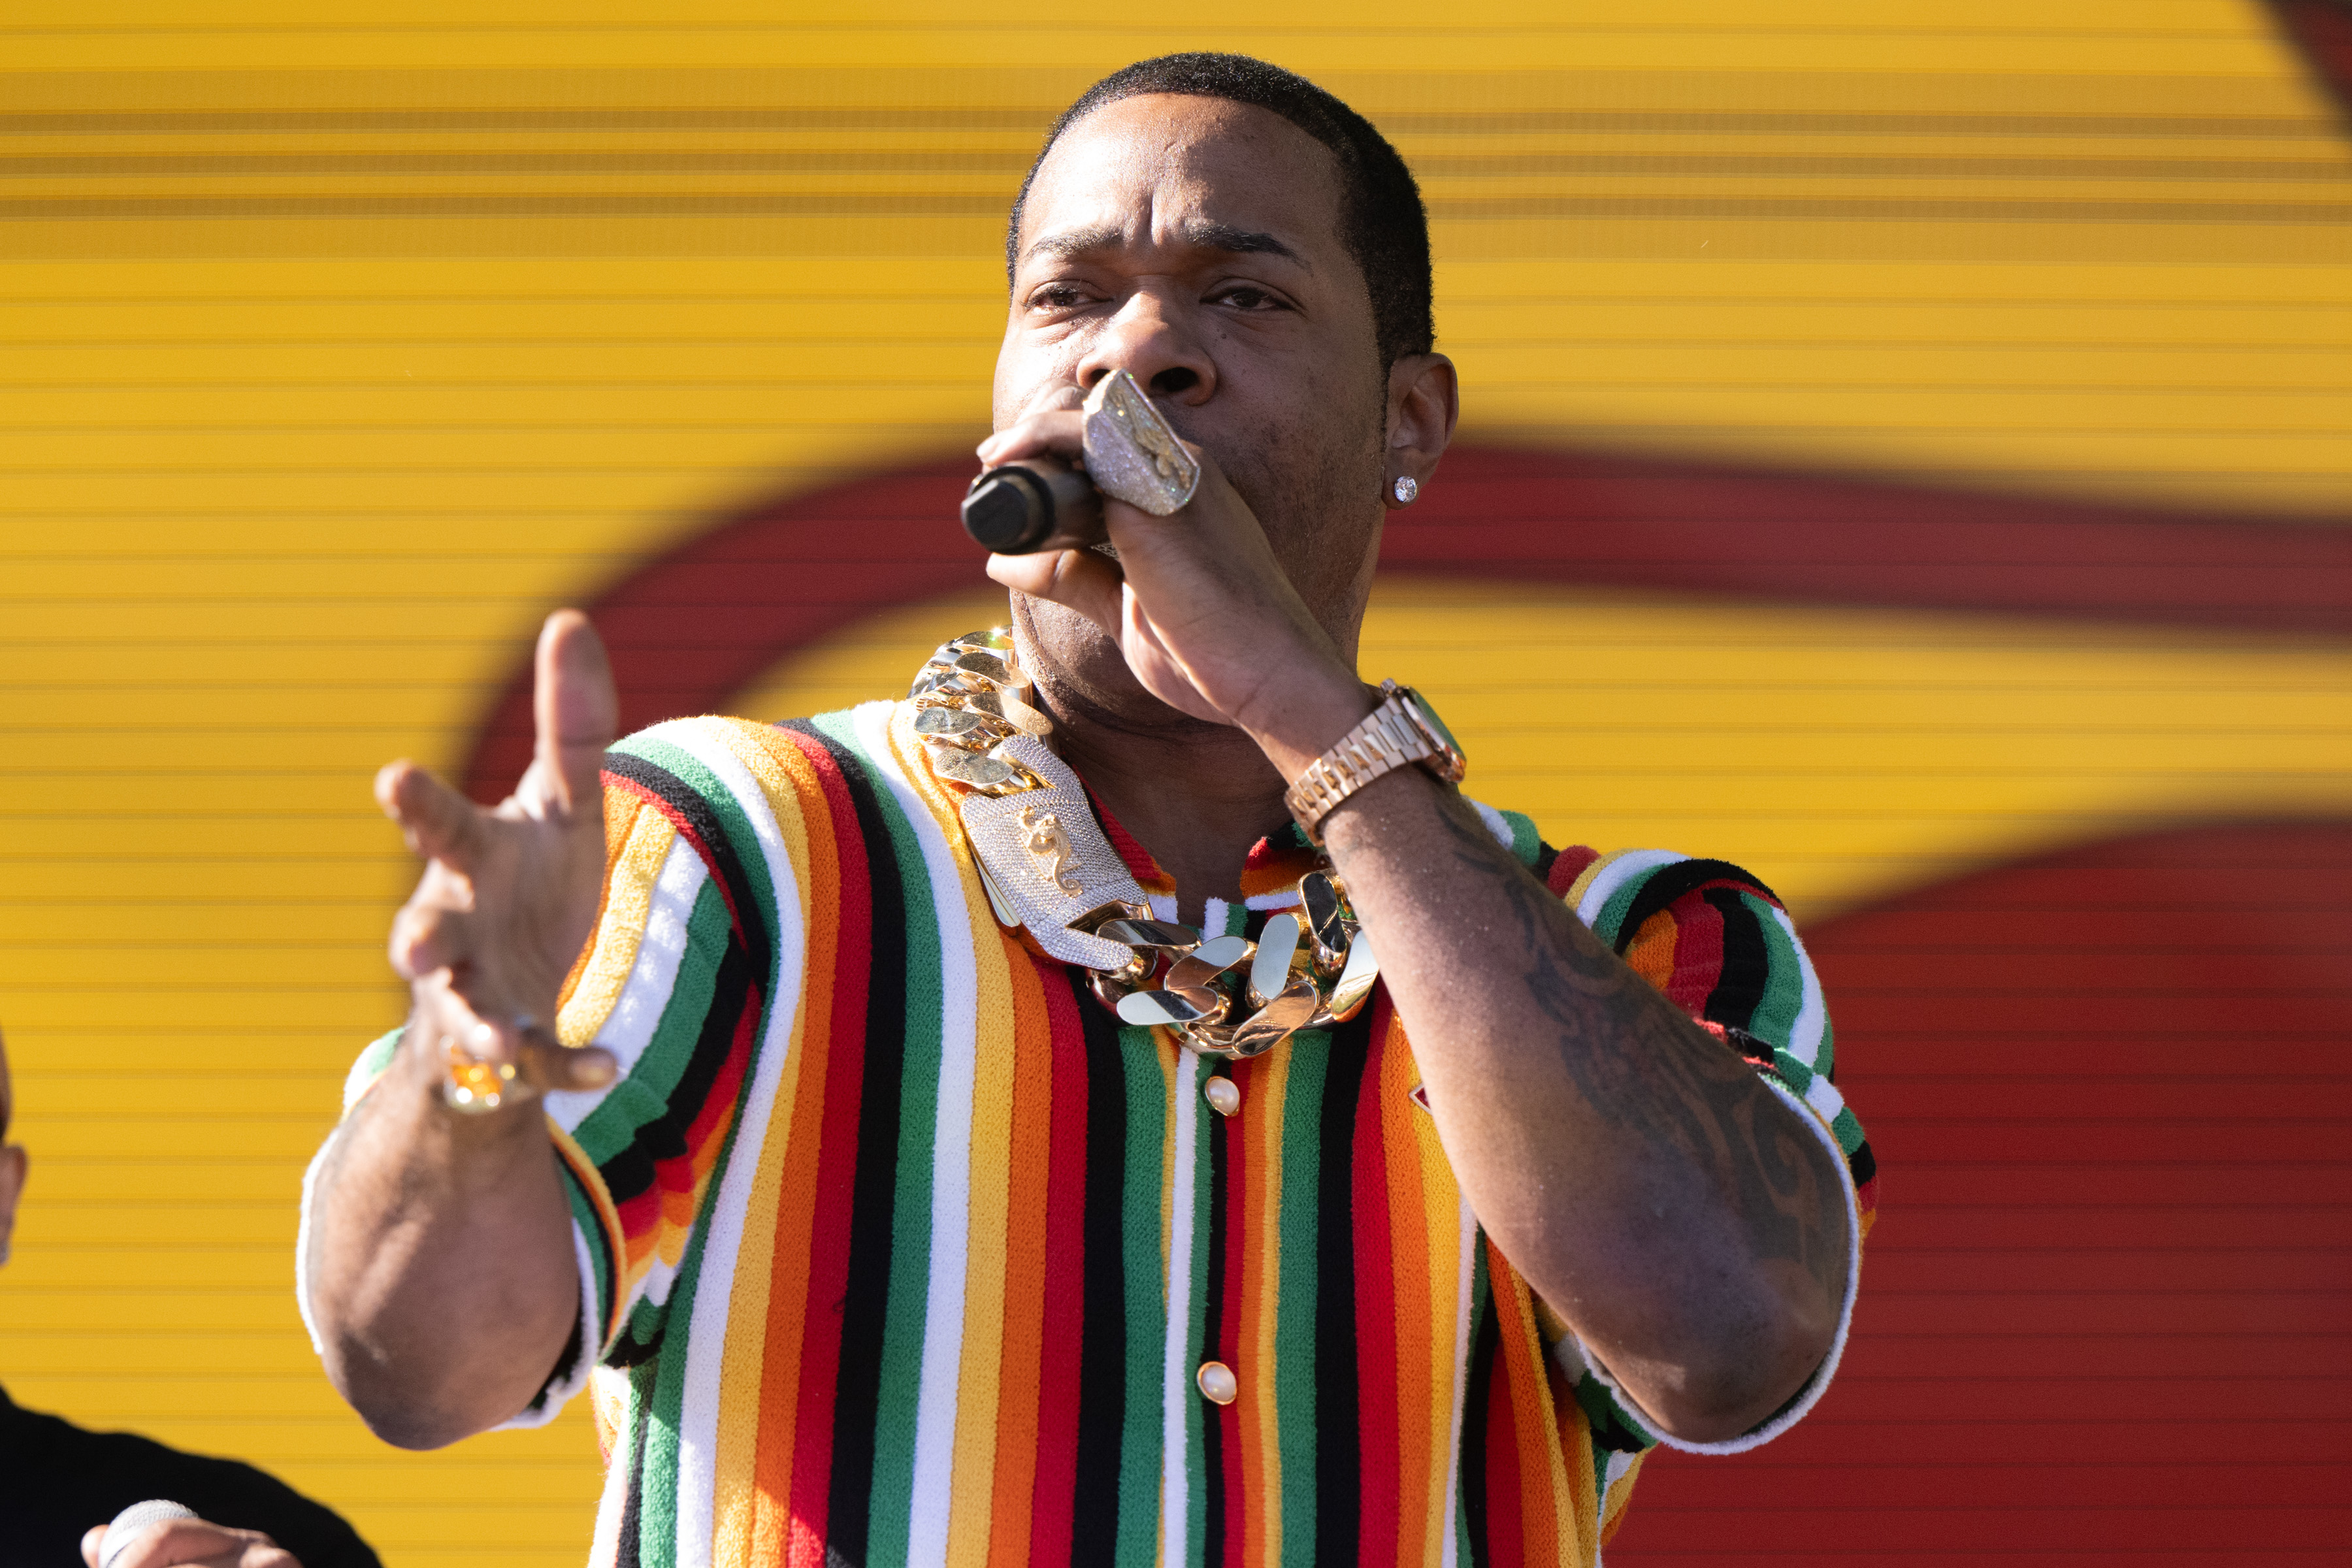 Busta Rhymes performs on stage, wearing a colorful striped shirt and a large gold chain necklace